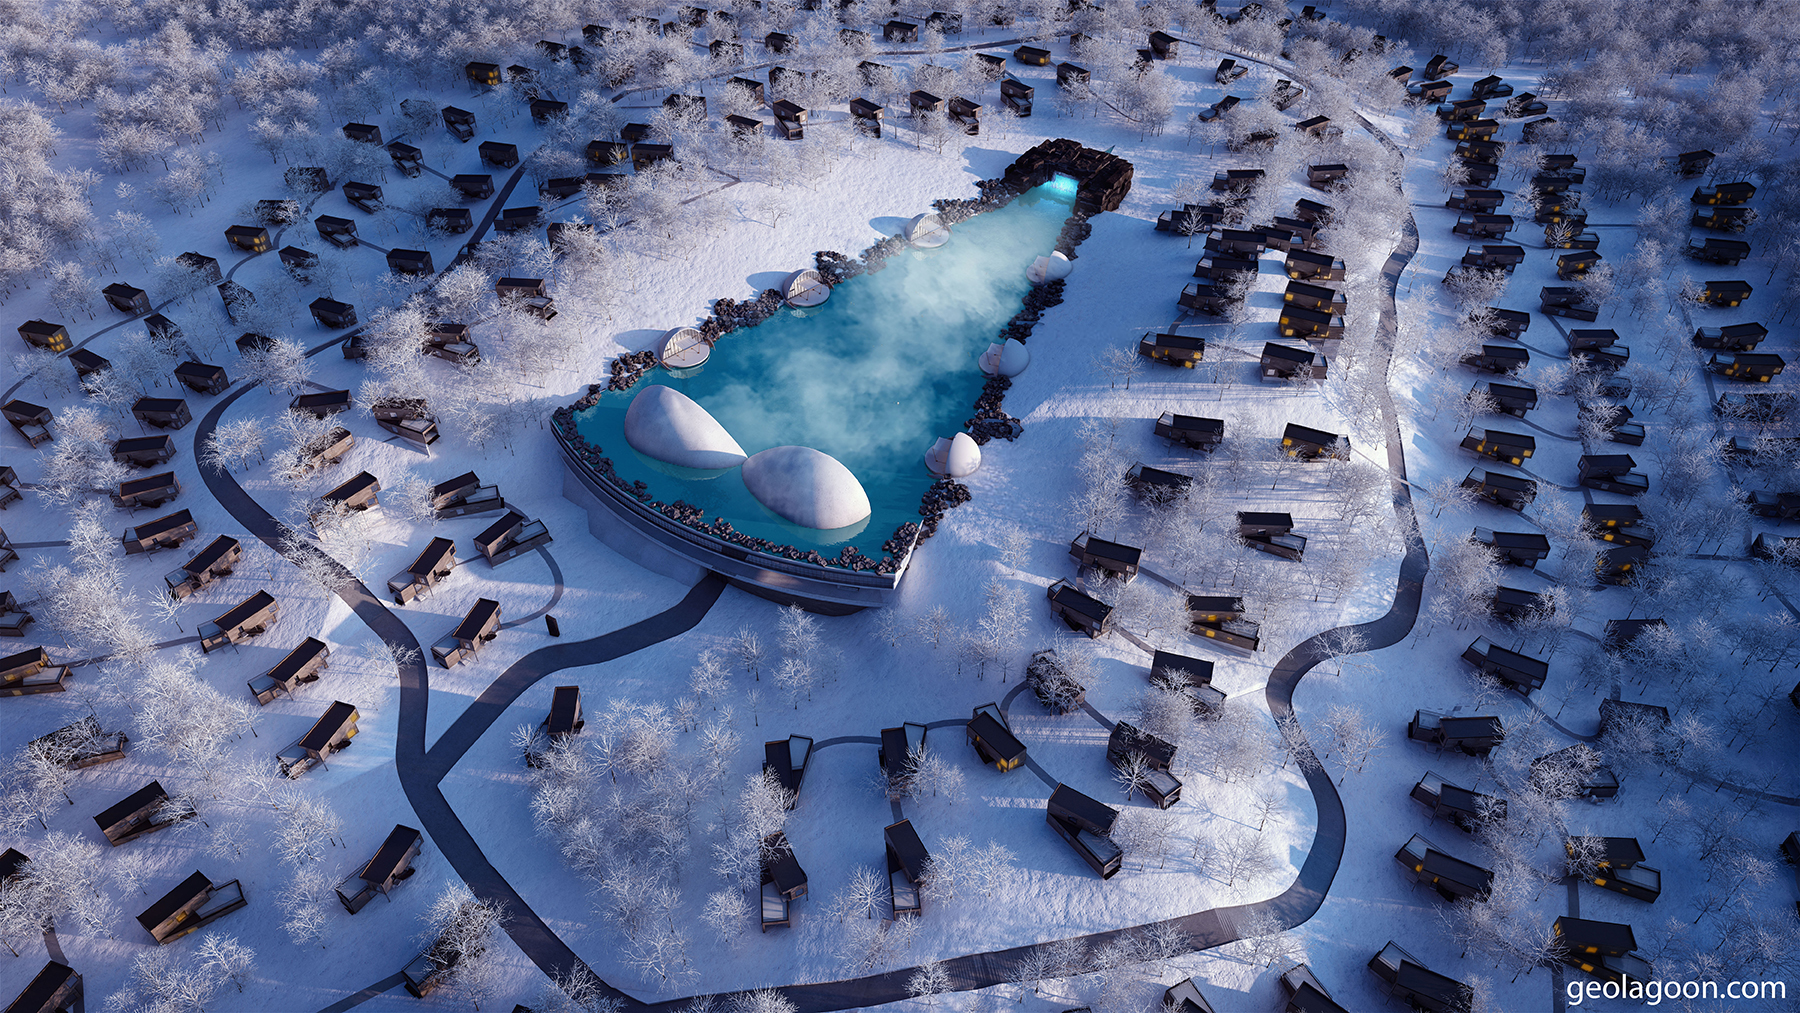 lagoon and chalets in snow